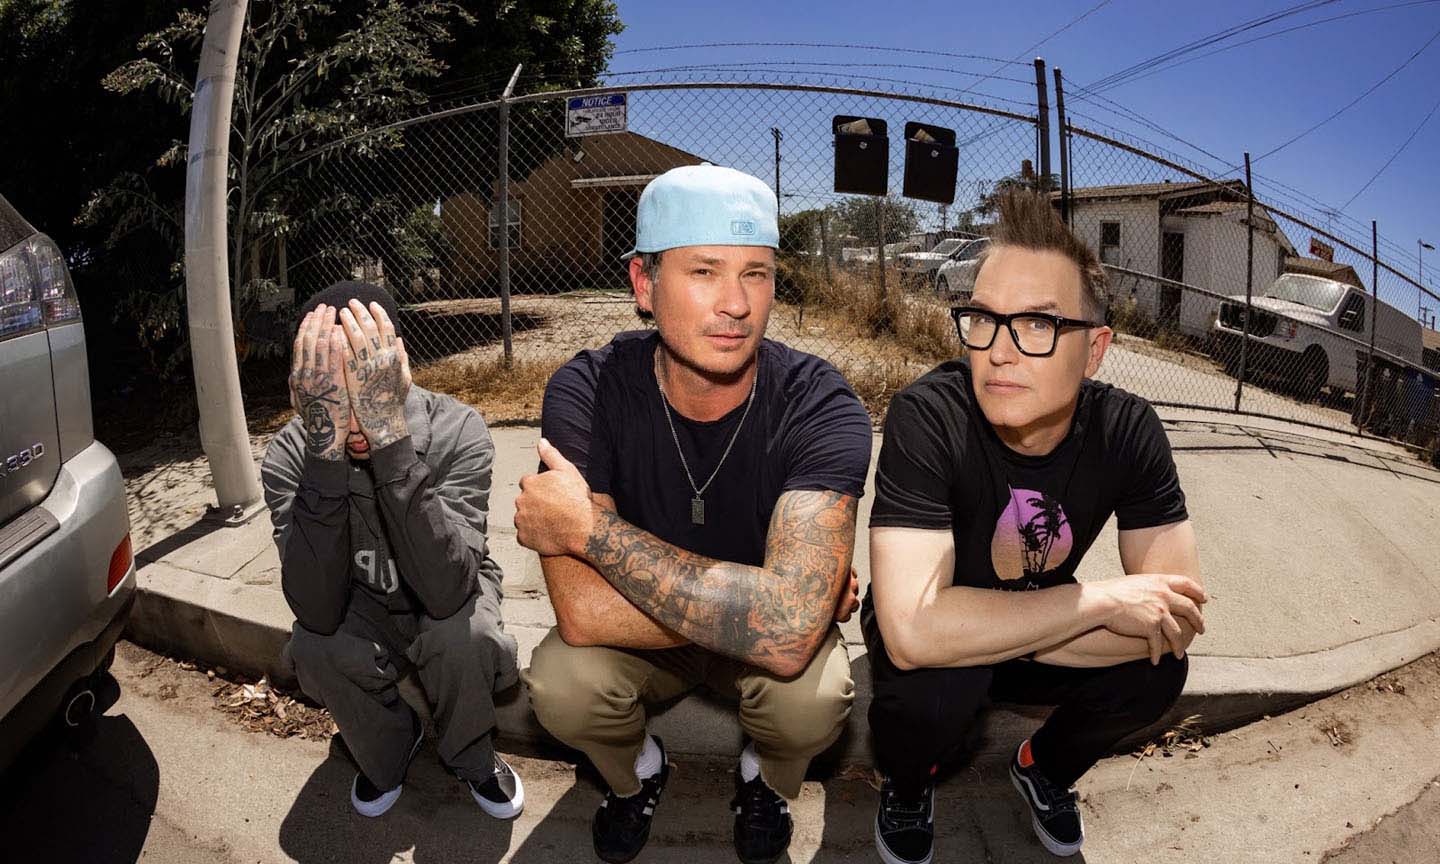 BLINK-182 Returns To North America For Final Leg Of Stadium And Arena Tour